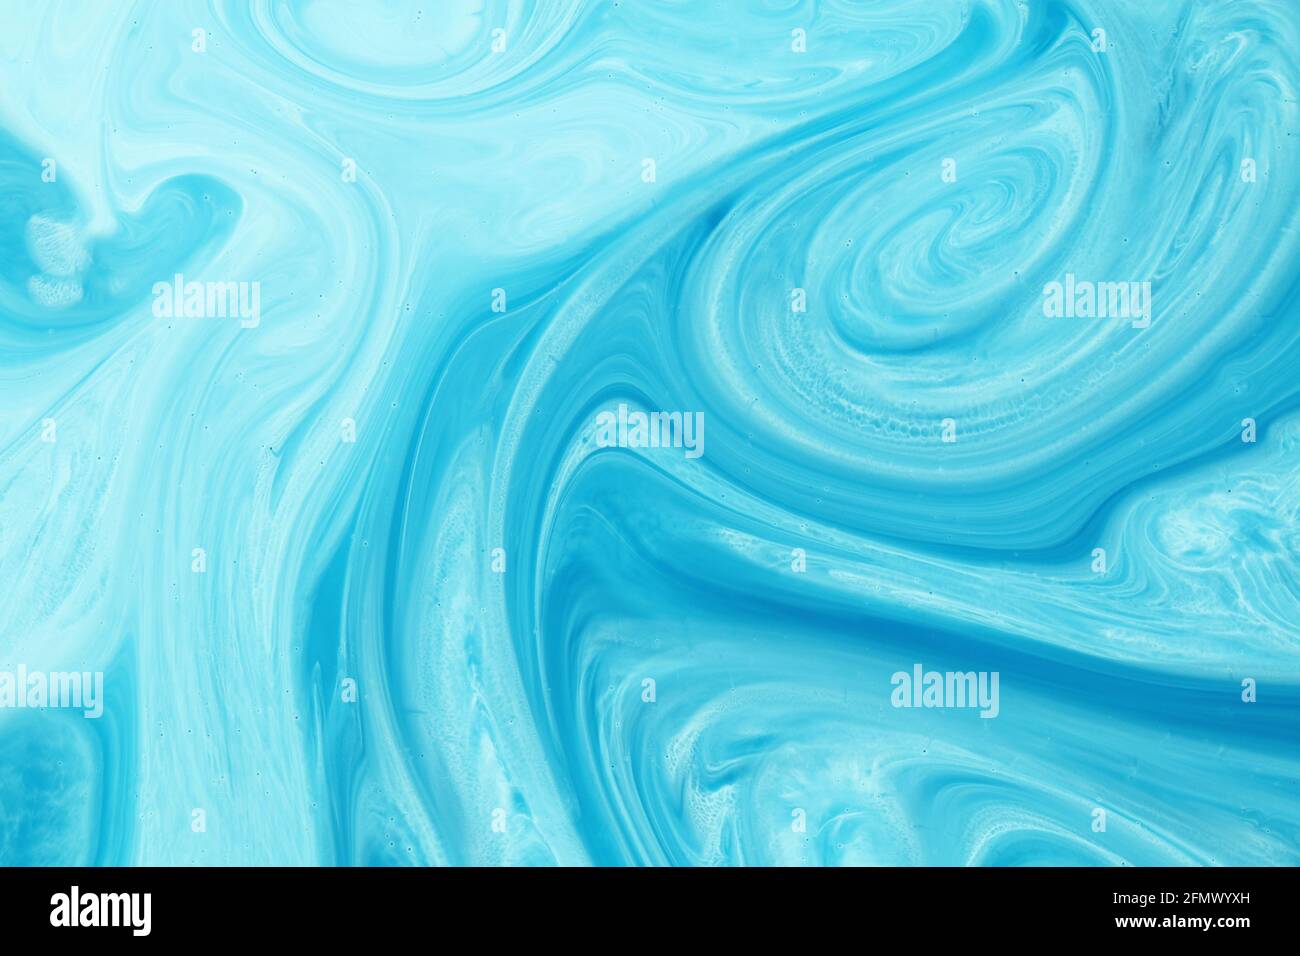 sea blue and white ink mixing, natural water wave texture background ...